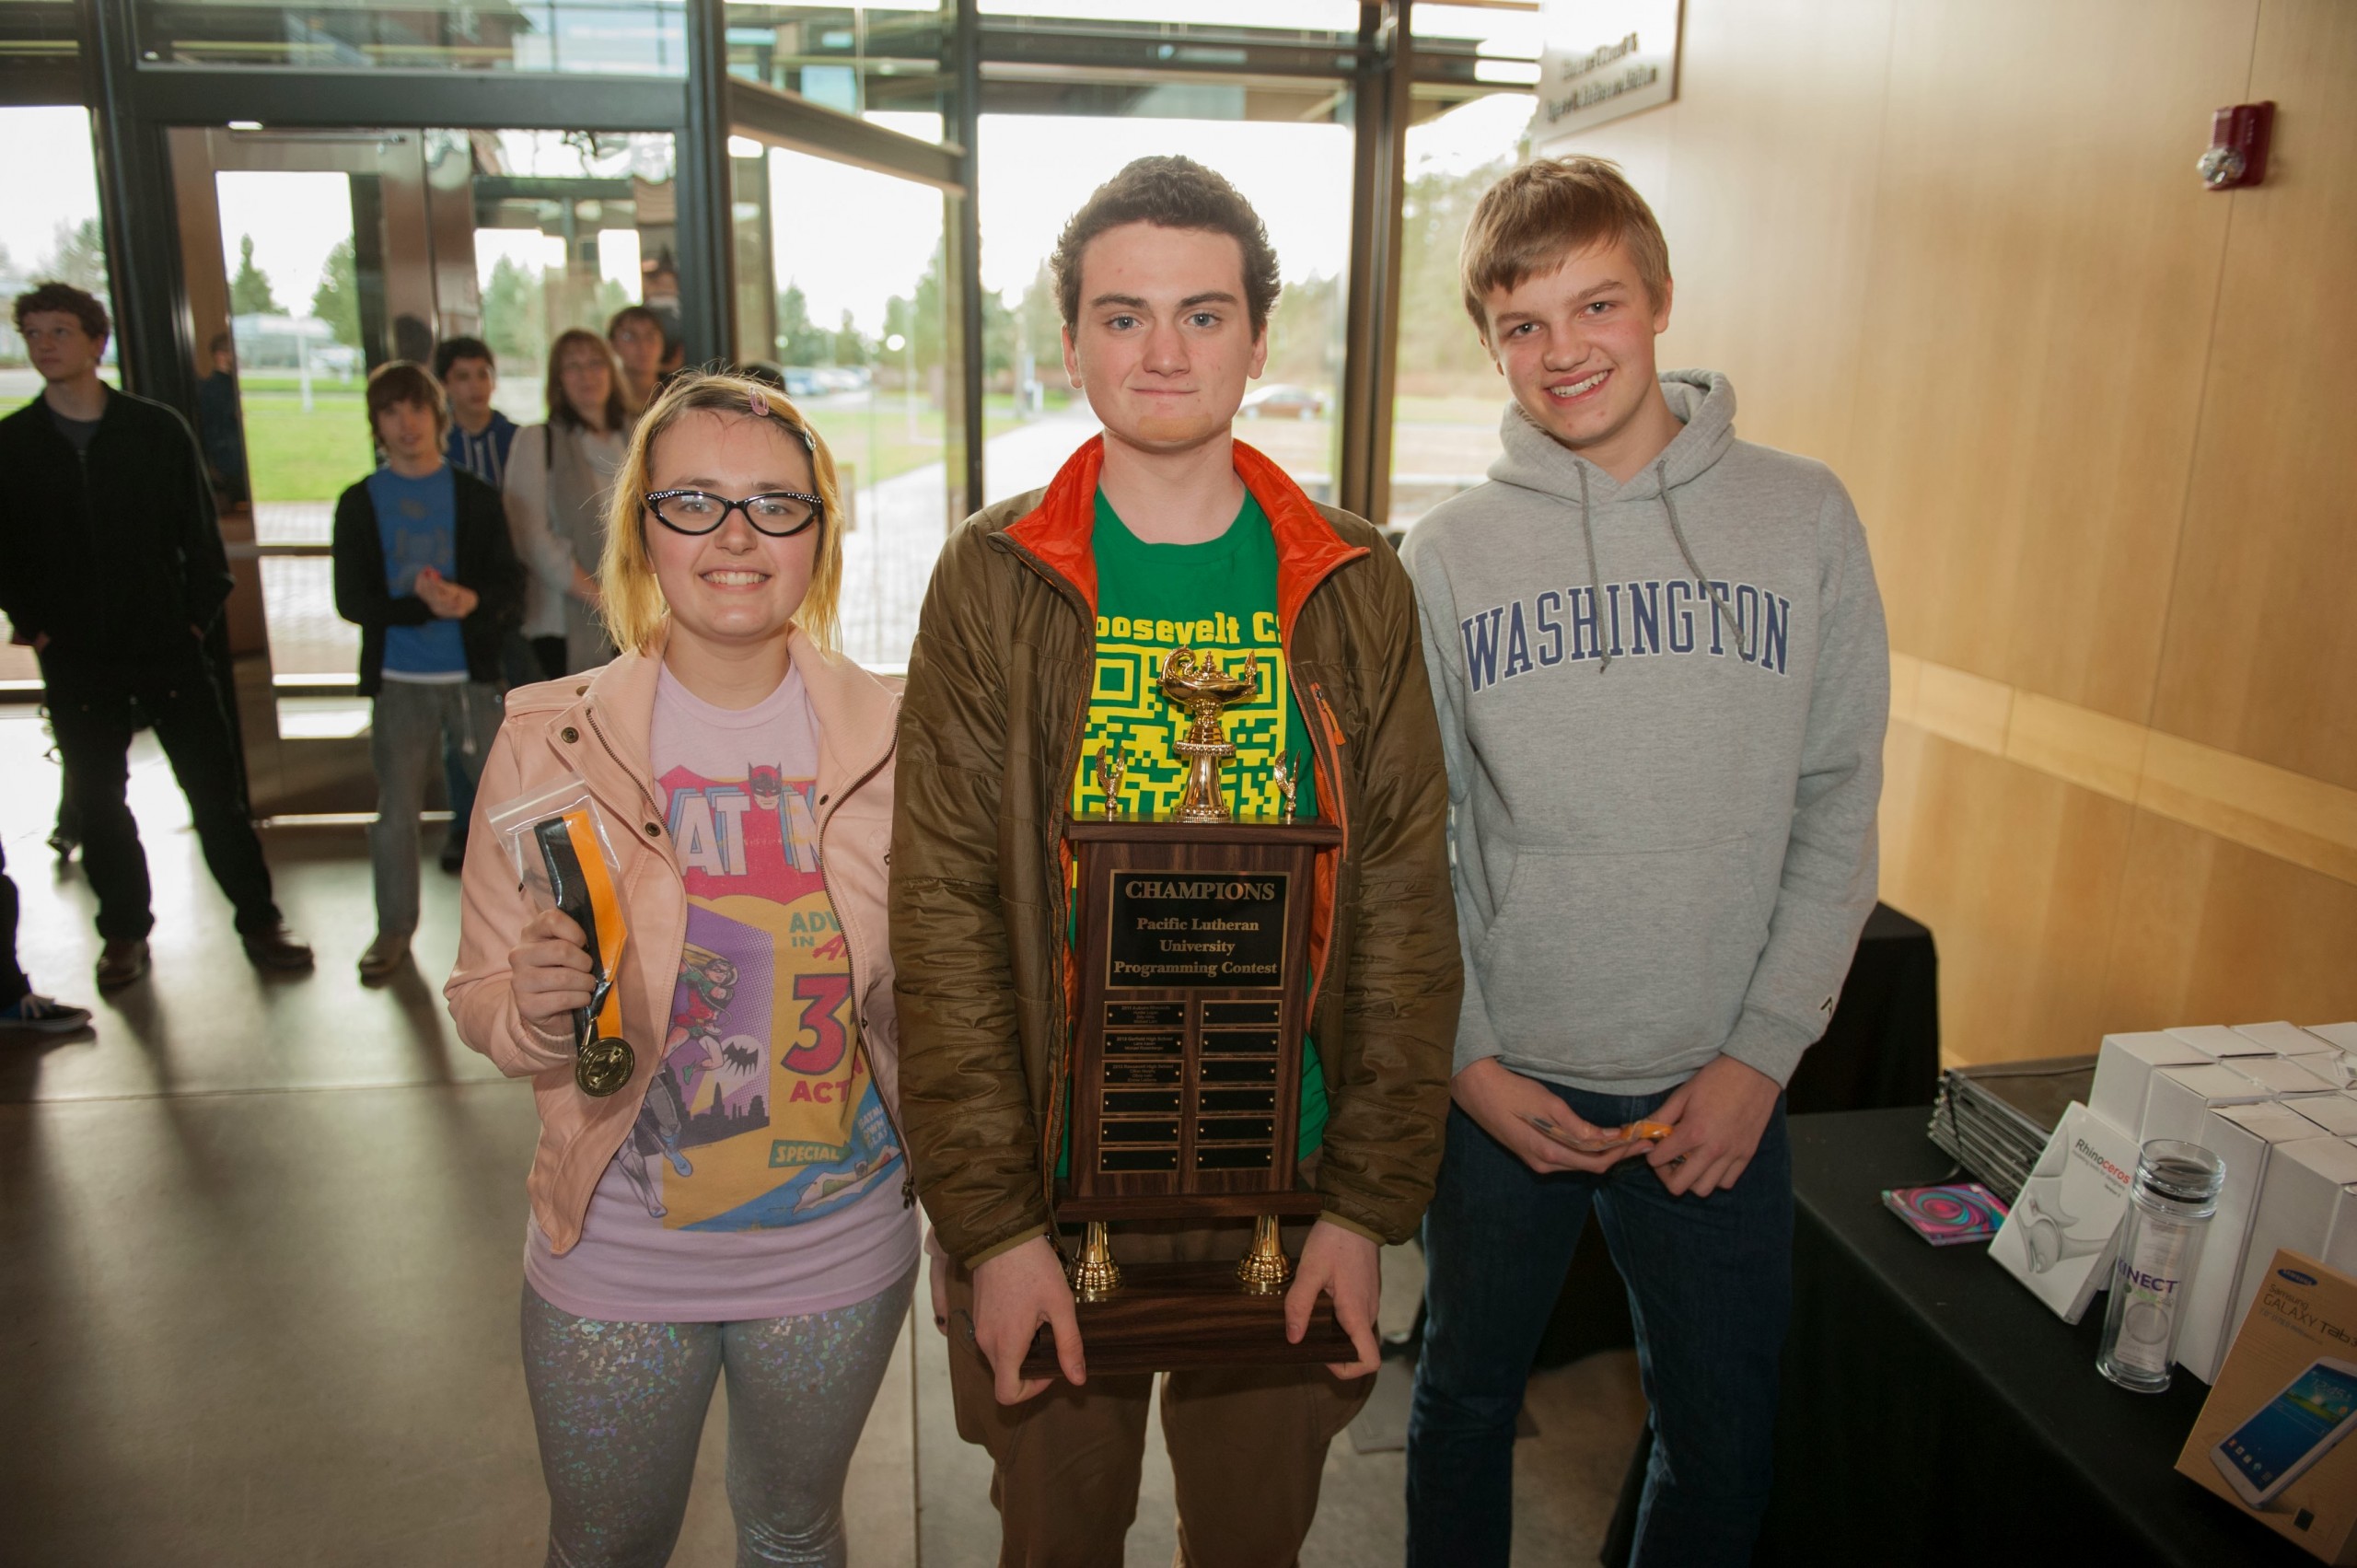 Roosevelt High School’s team, Cillian Murphy, Emma LaMarca and Nathaniel Swedberg, won first place in the Advanced division for the second year in a row. (Photo: John Struzenberg ’15)